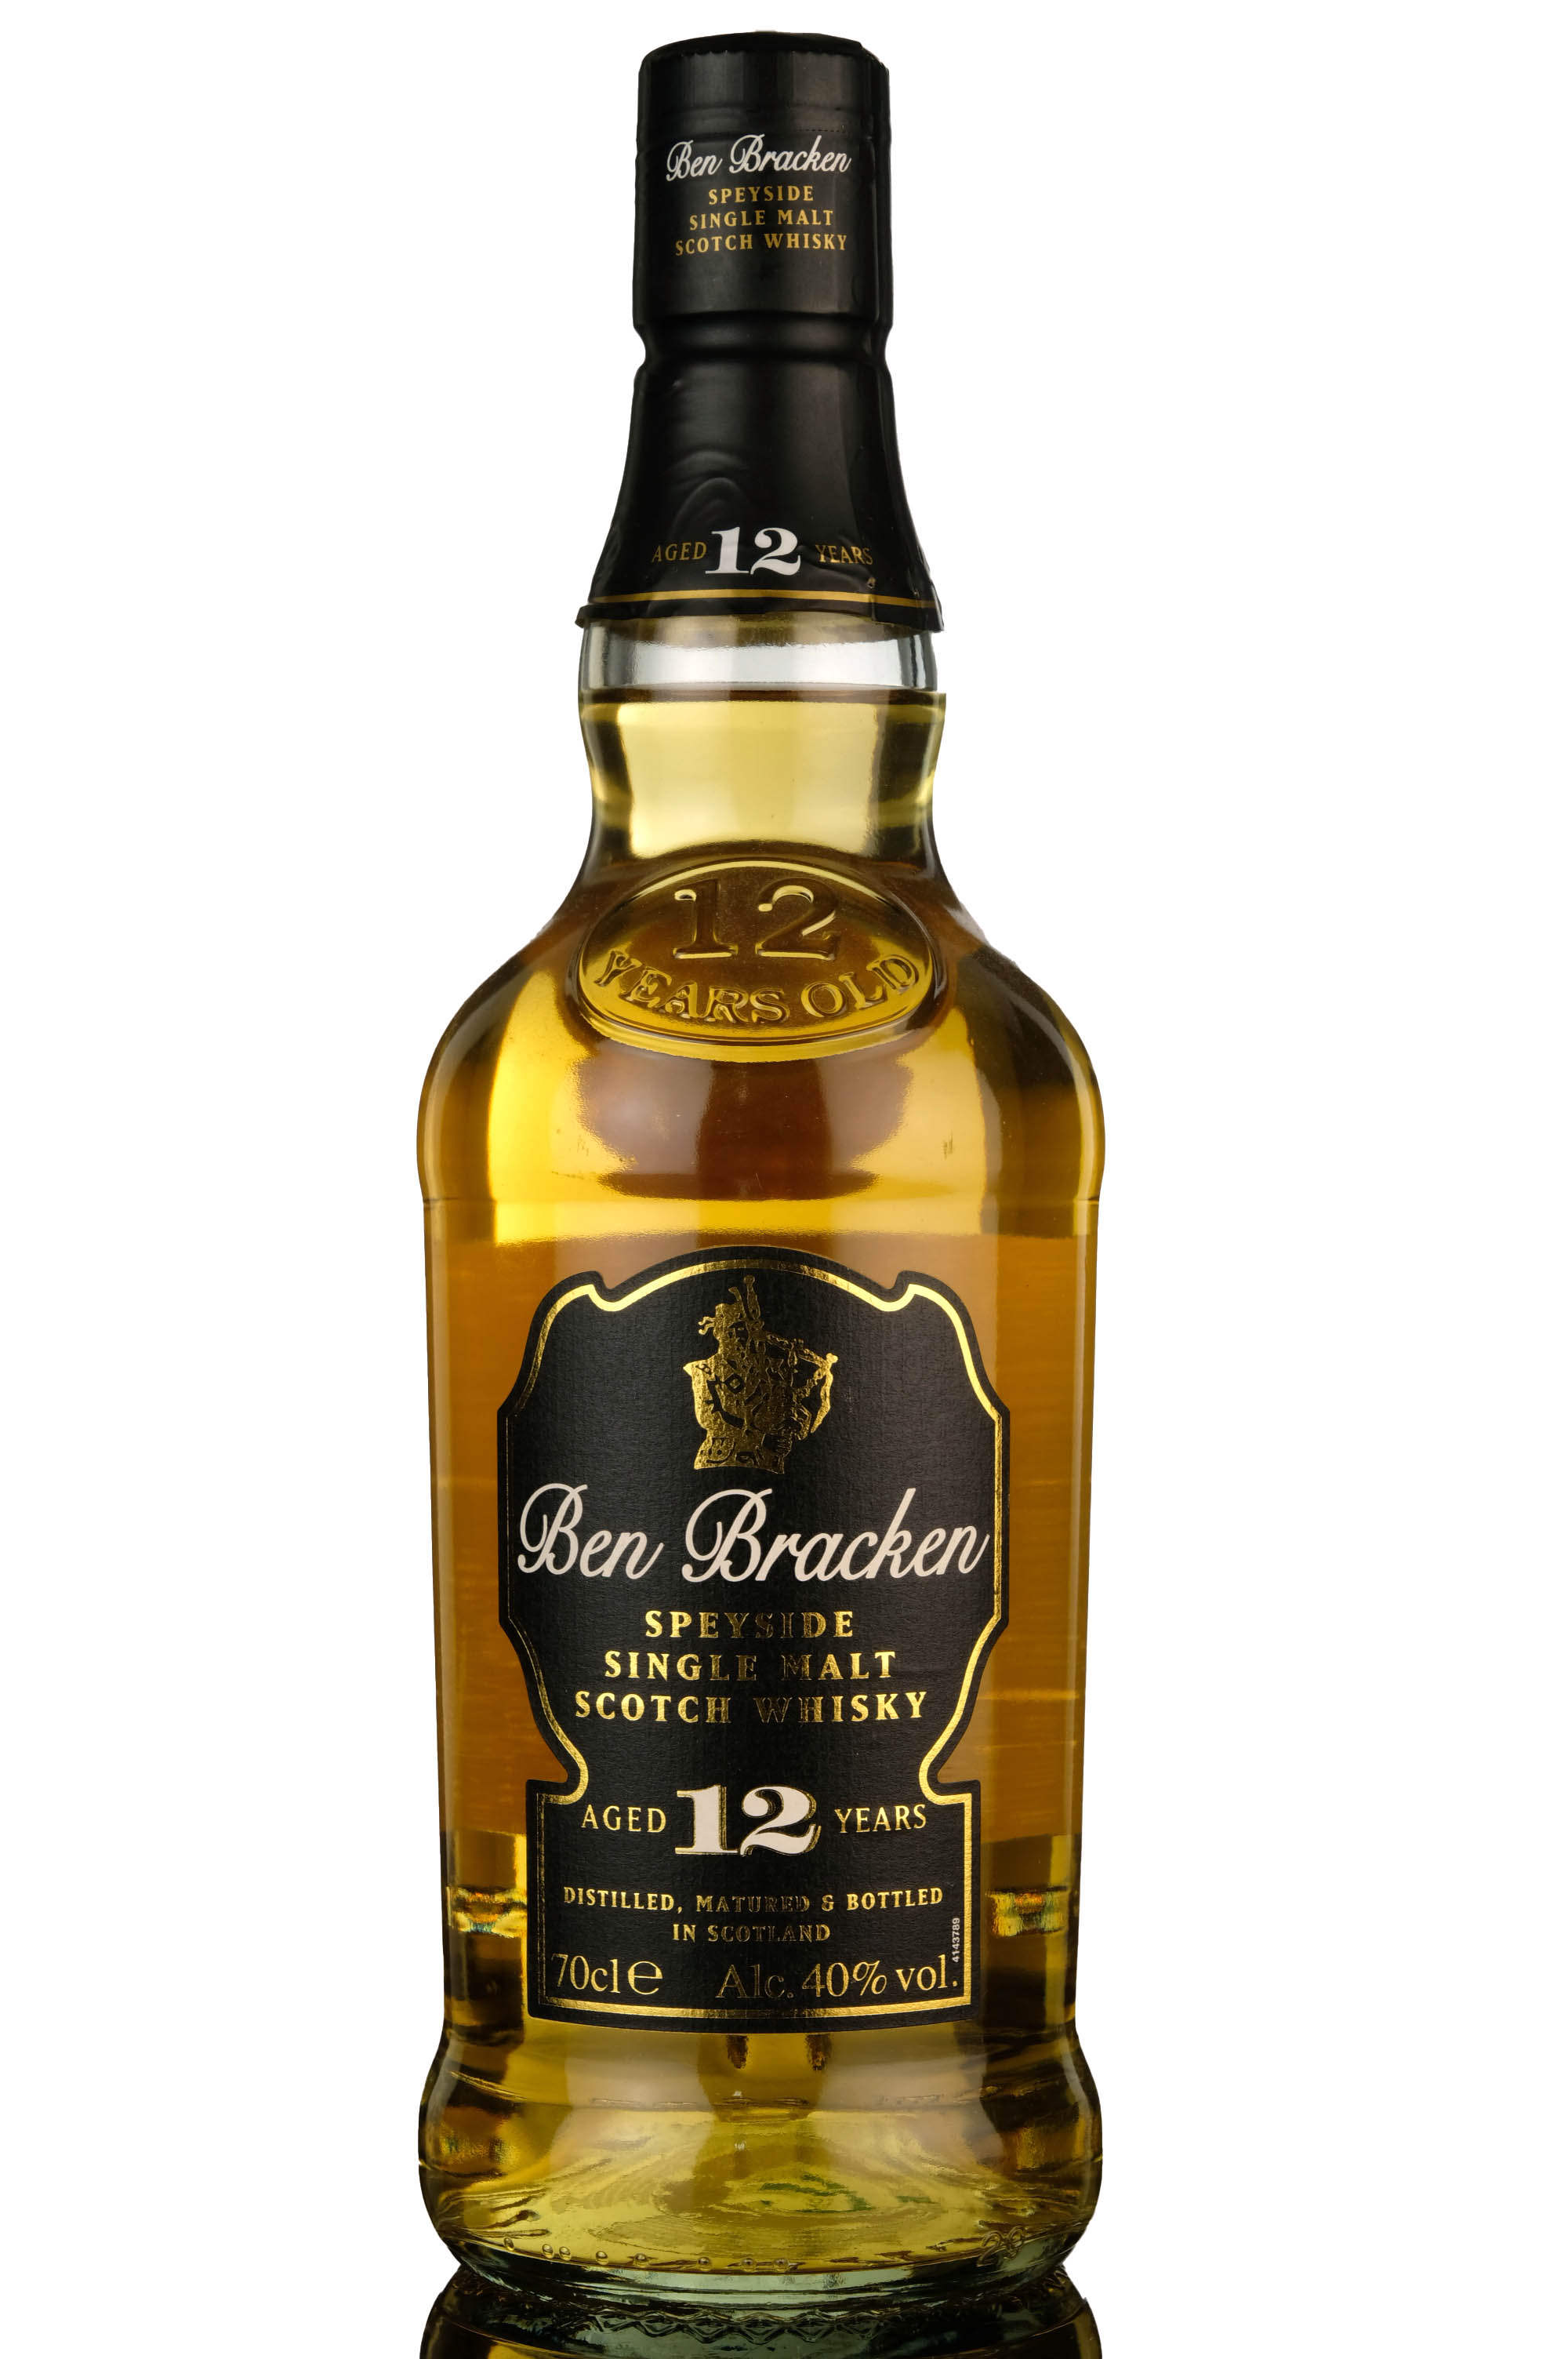 00 21 PM 2023 PM 8 - 00 Date 8 Date Start Jan 2022 00 Whisky-Online Dec End Auctions 04 00